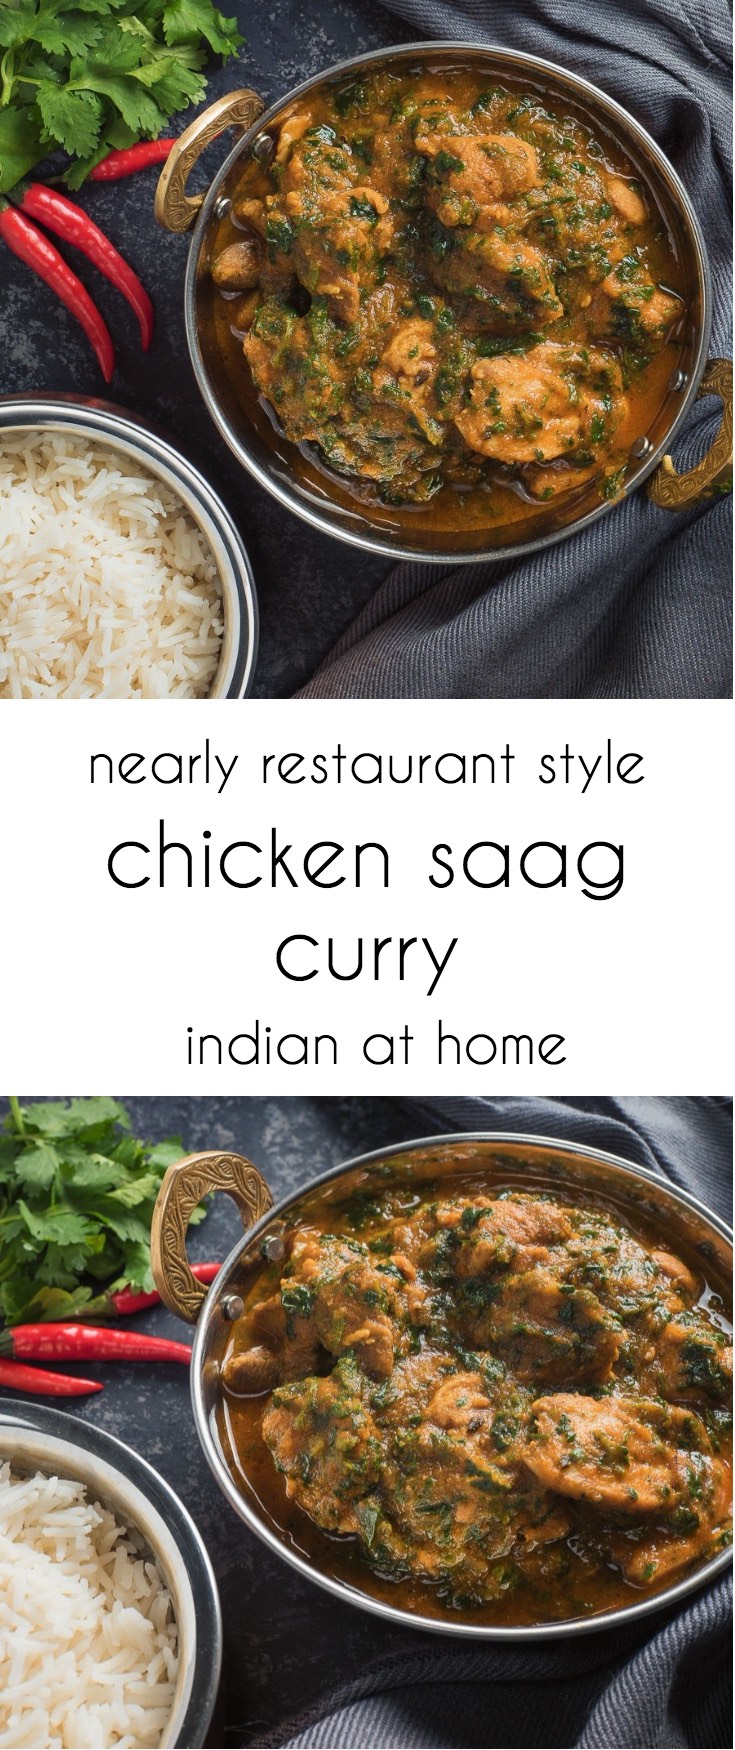 You can make chicken saag at home that will rival what you get in Indian restaurants